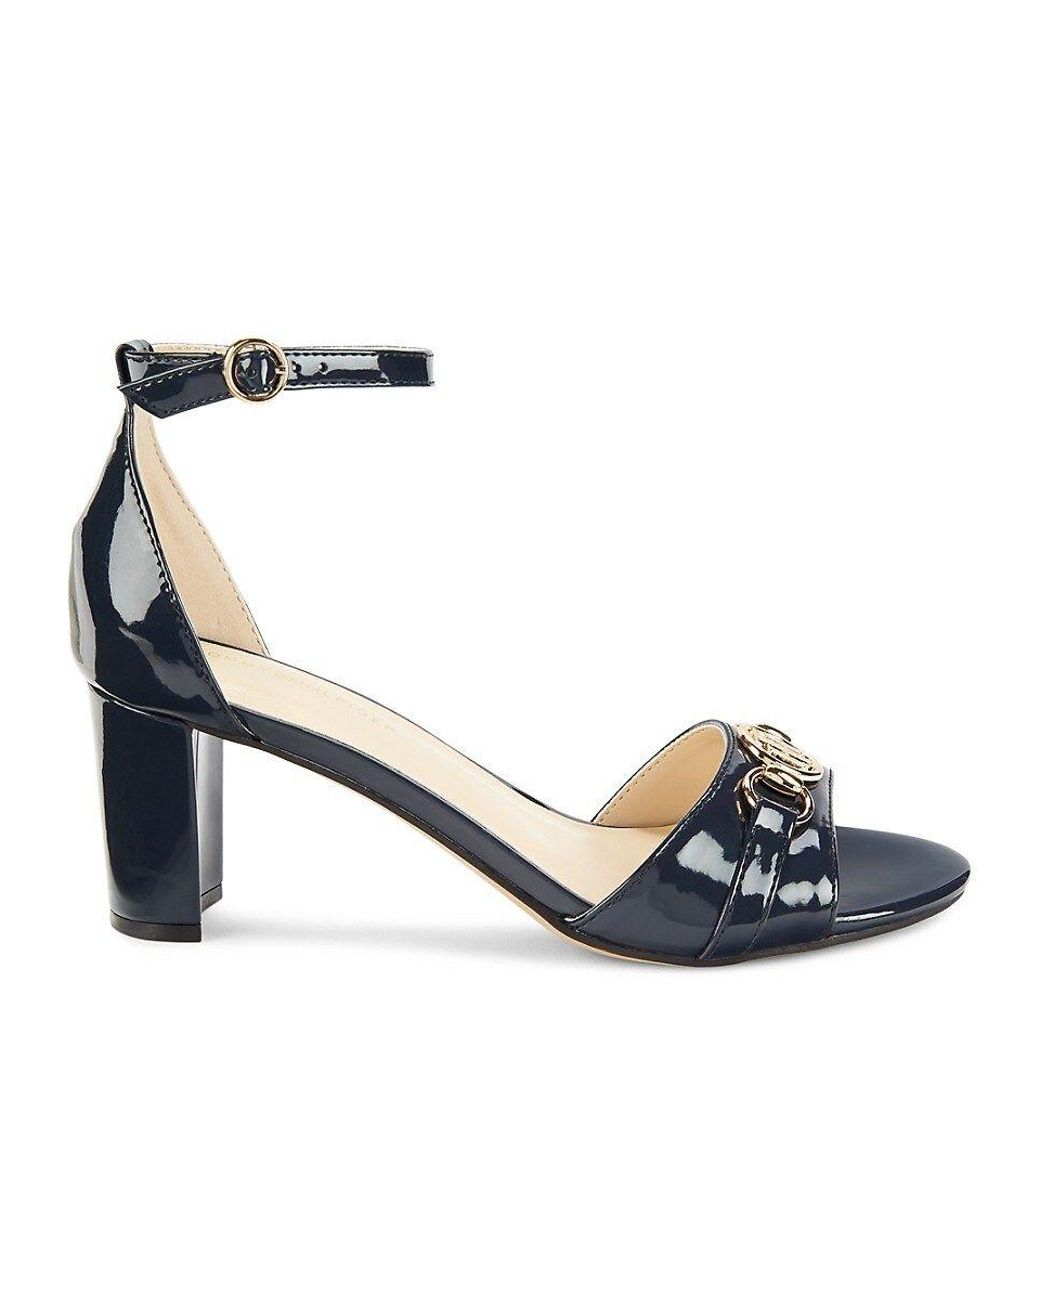 Tommy Hilfiger Rusina Metallic Ankle Strap Sandals in Blue | Lyst